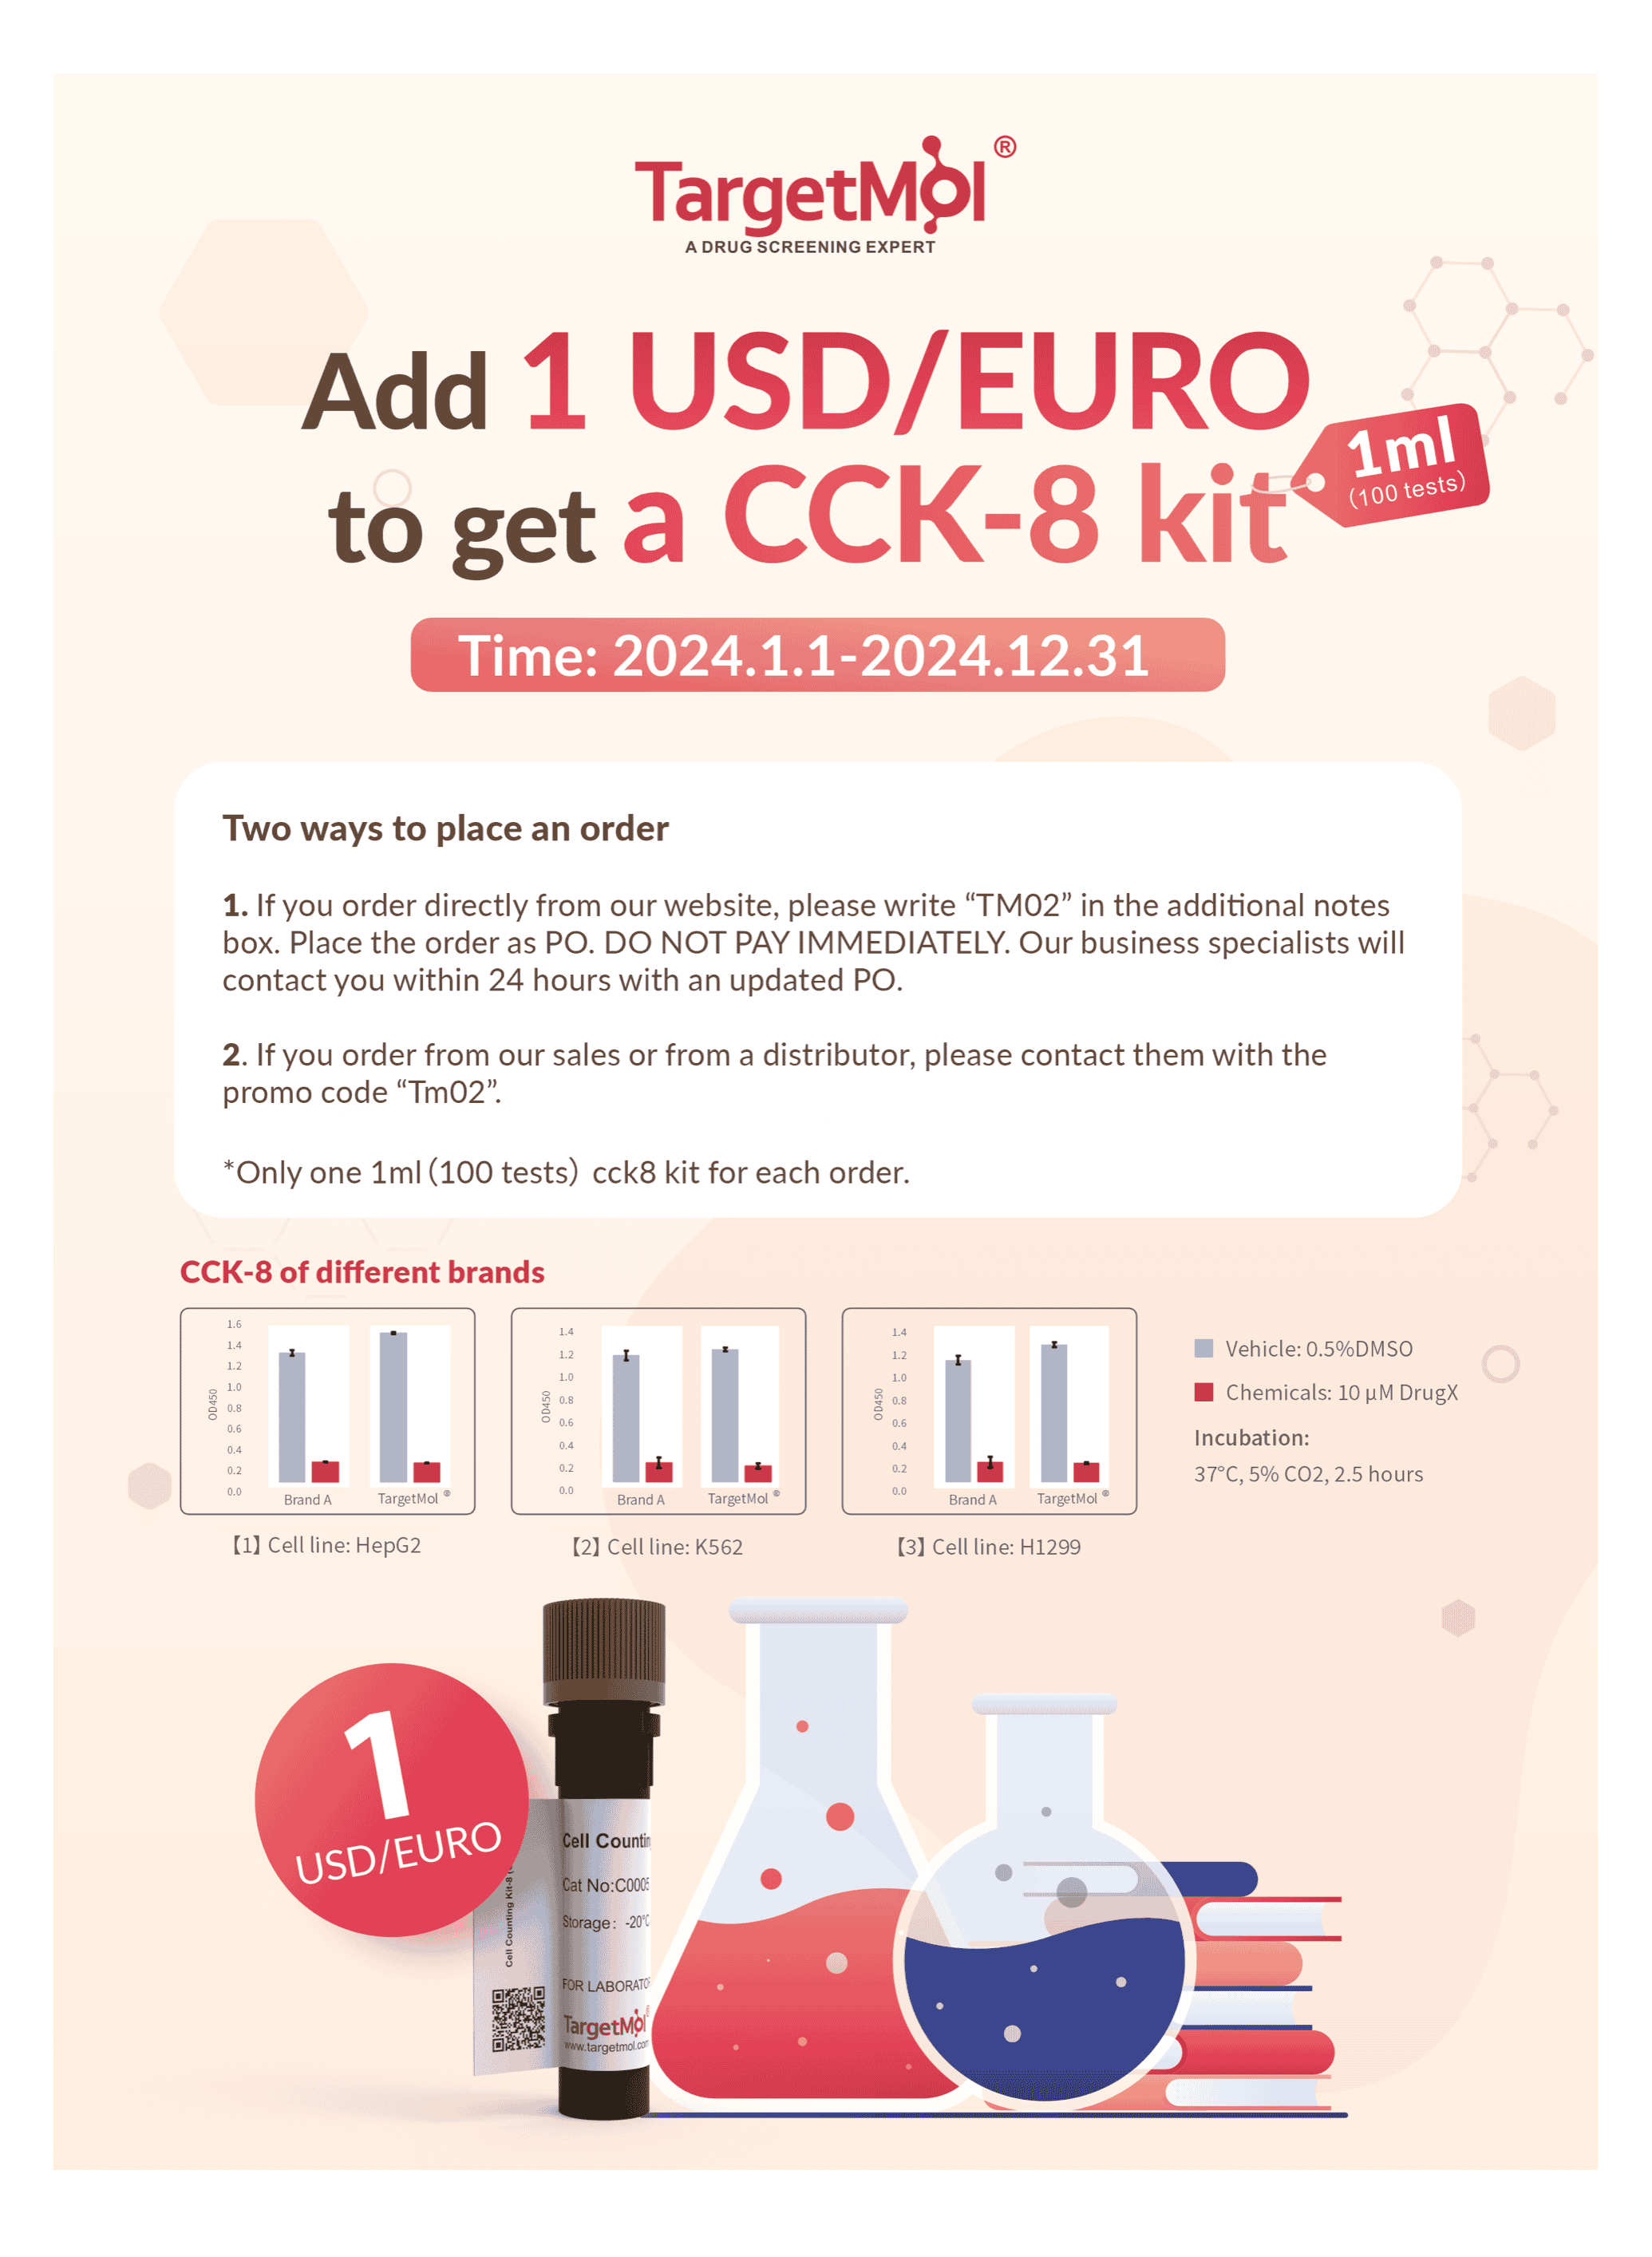 WAdd 1 UDS/EURO to get a CCK-8 kit 1ml(100 tests)